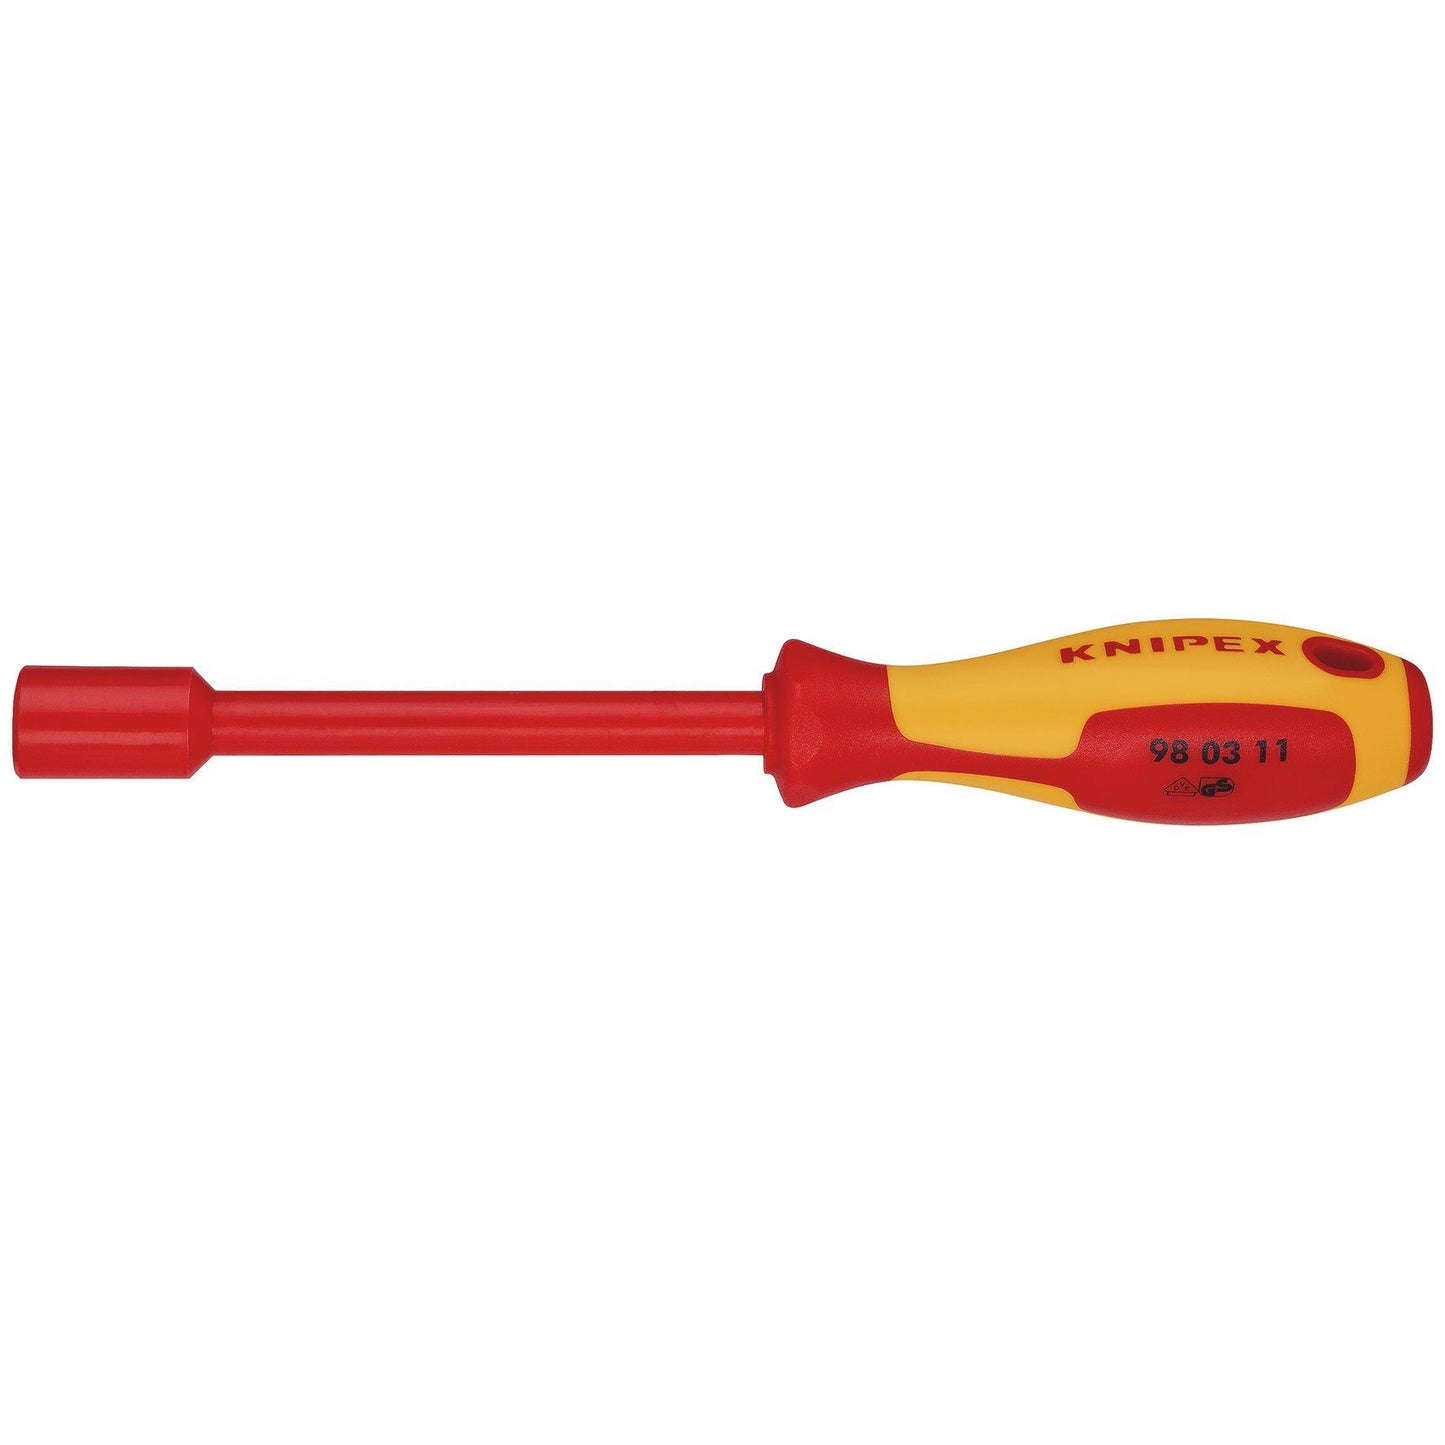 KNIPEX 98 03 11 VDE Insulated Nut Driver, 11.0 x 125mm